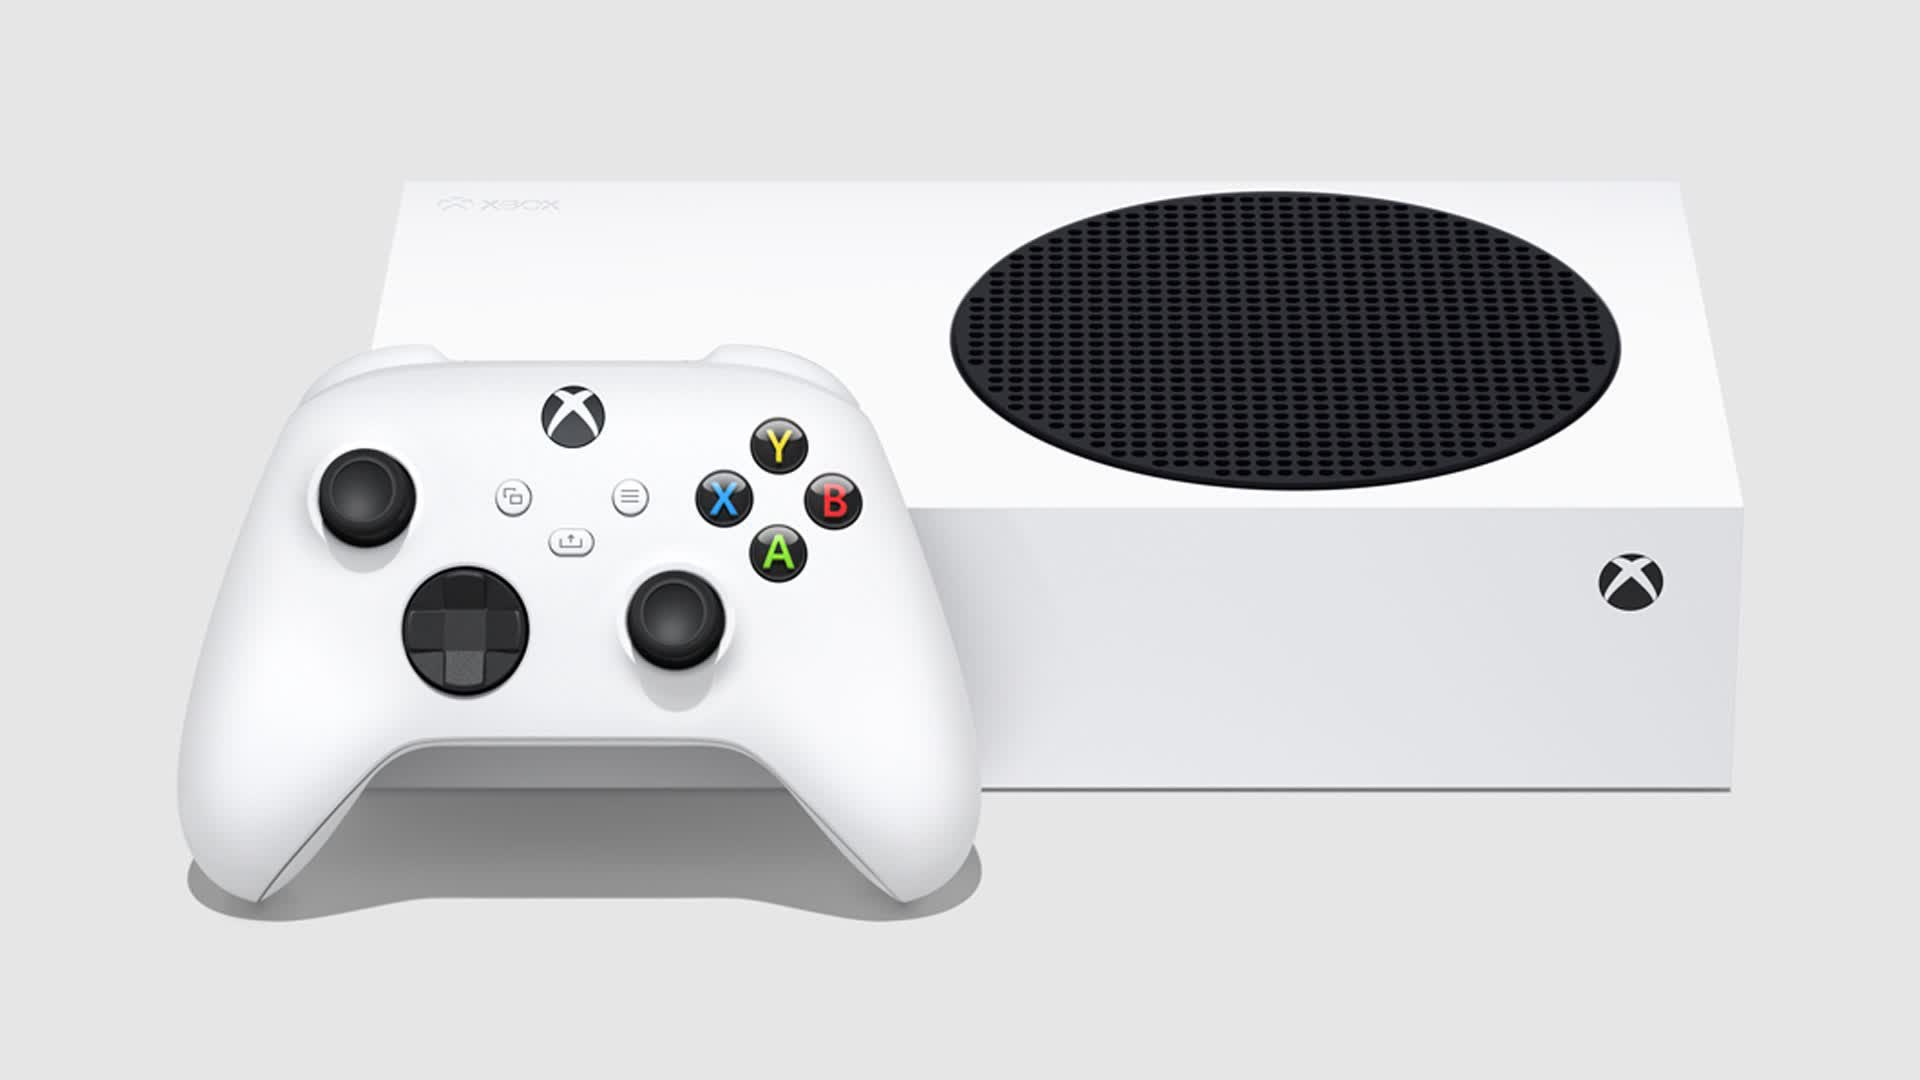 The Xbox Series S is Microsoft's best-selling console in some key markets